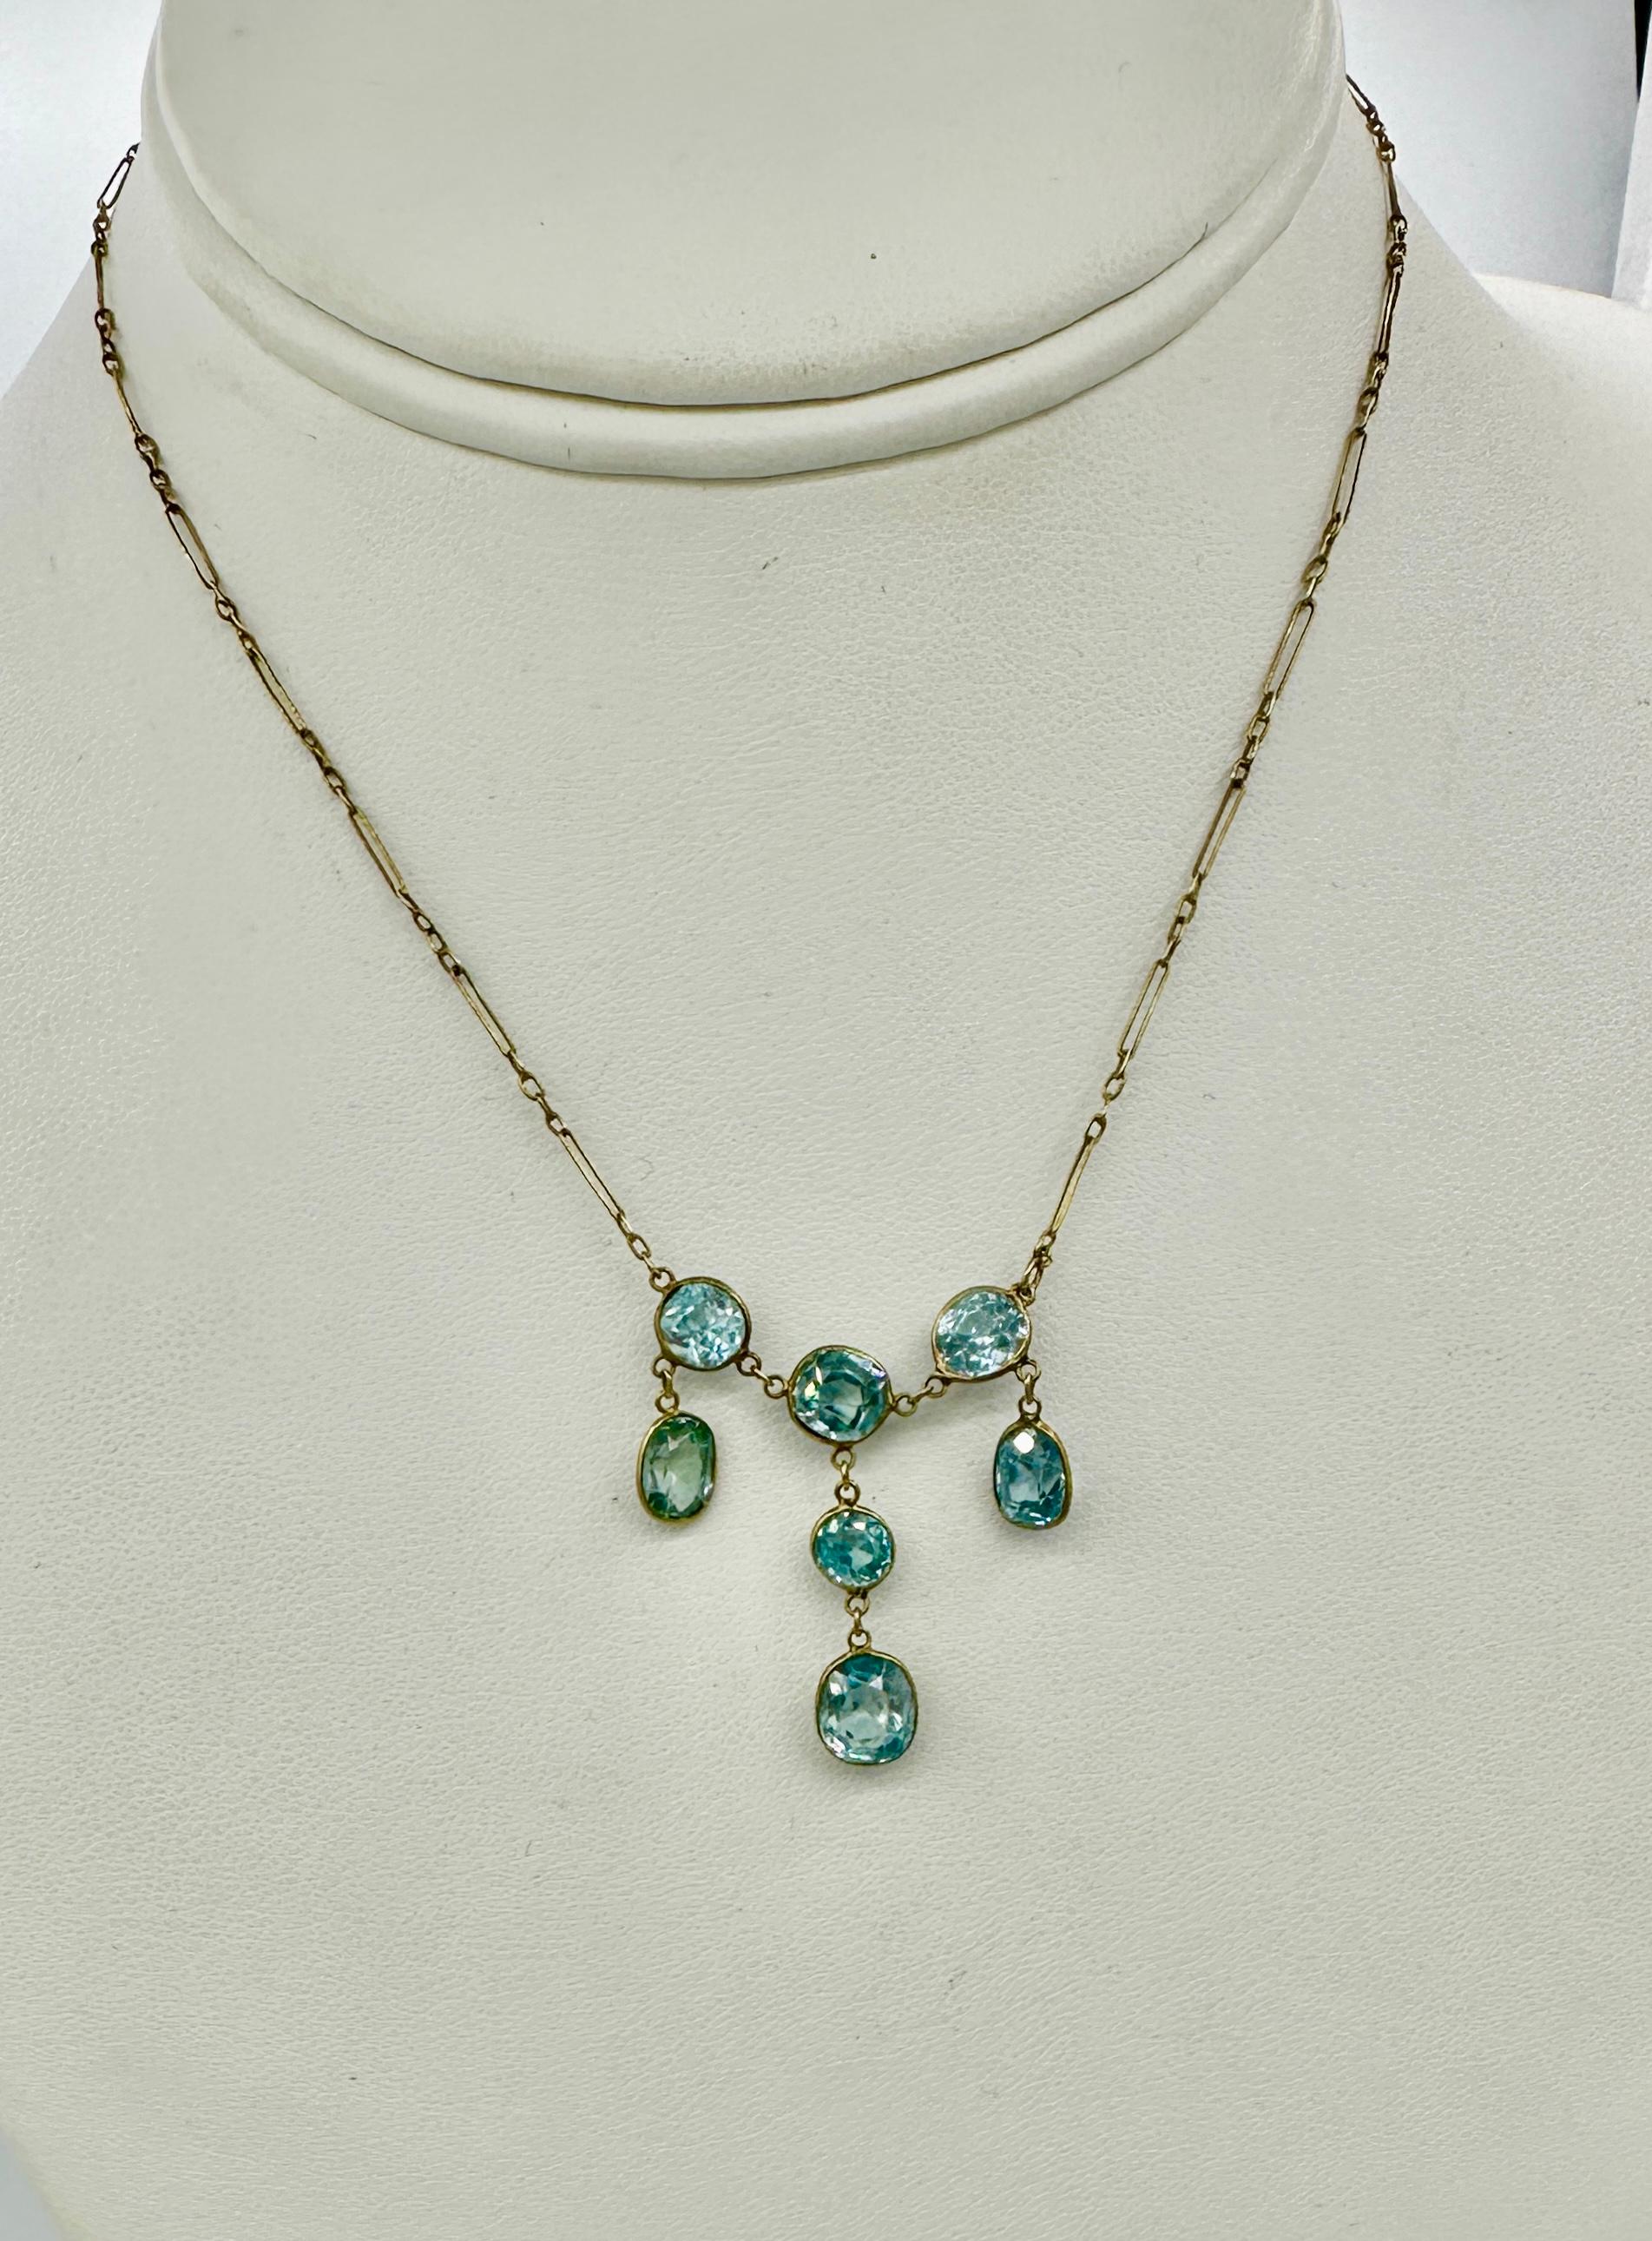 This is a stunning antique Retro Zircon Necklace with seven gorgeous round and oval faceted natural Zircon gems of great beauty in 10 Karat Gold. 
The antique Retro drop pendant necklace is absolutely wonderful and it is so rare to find necklaces